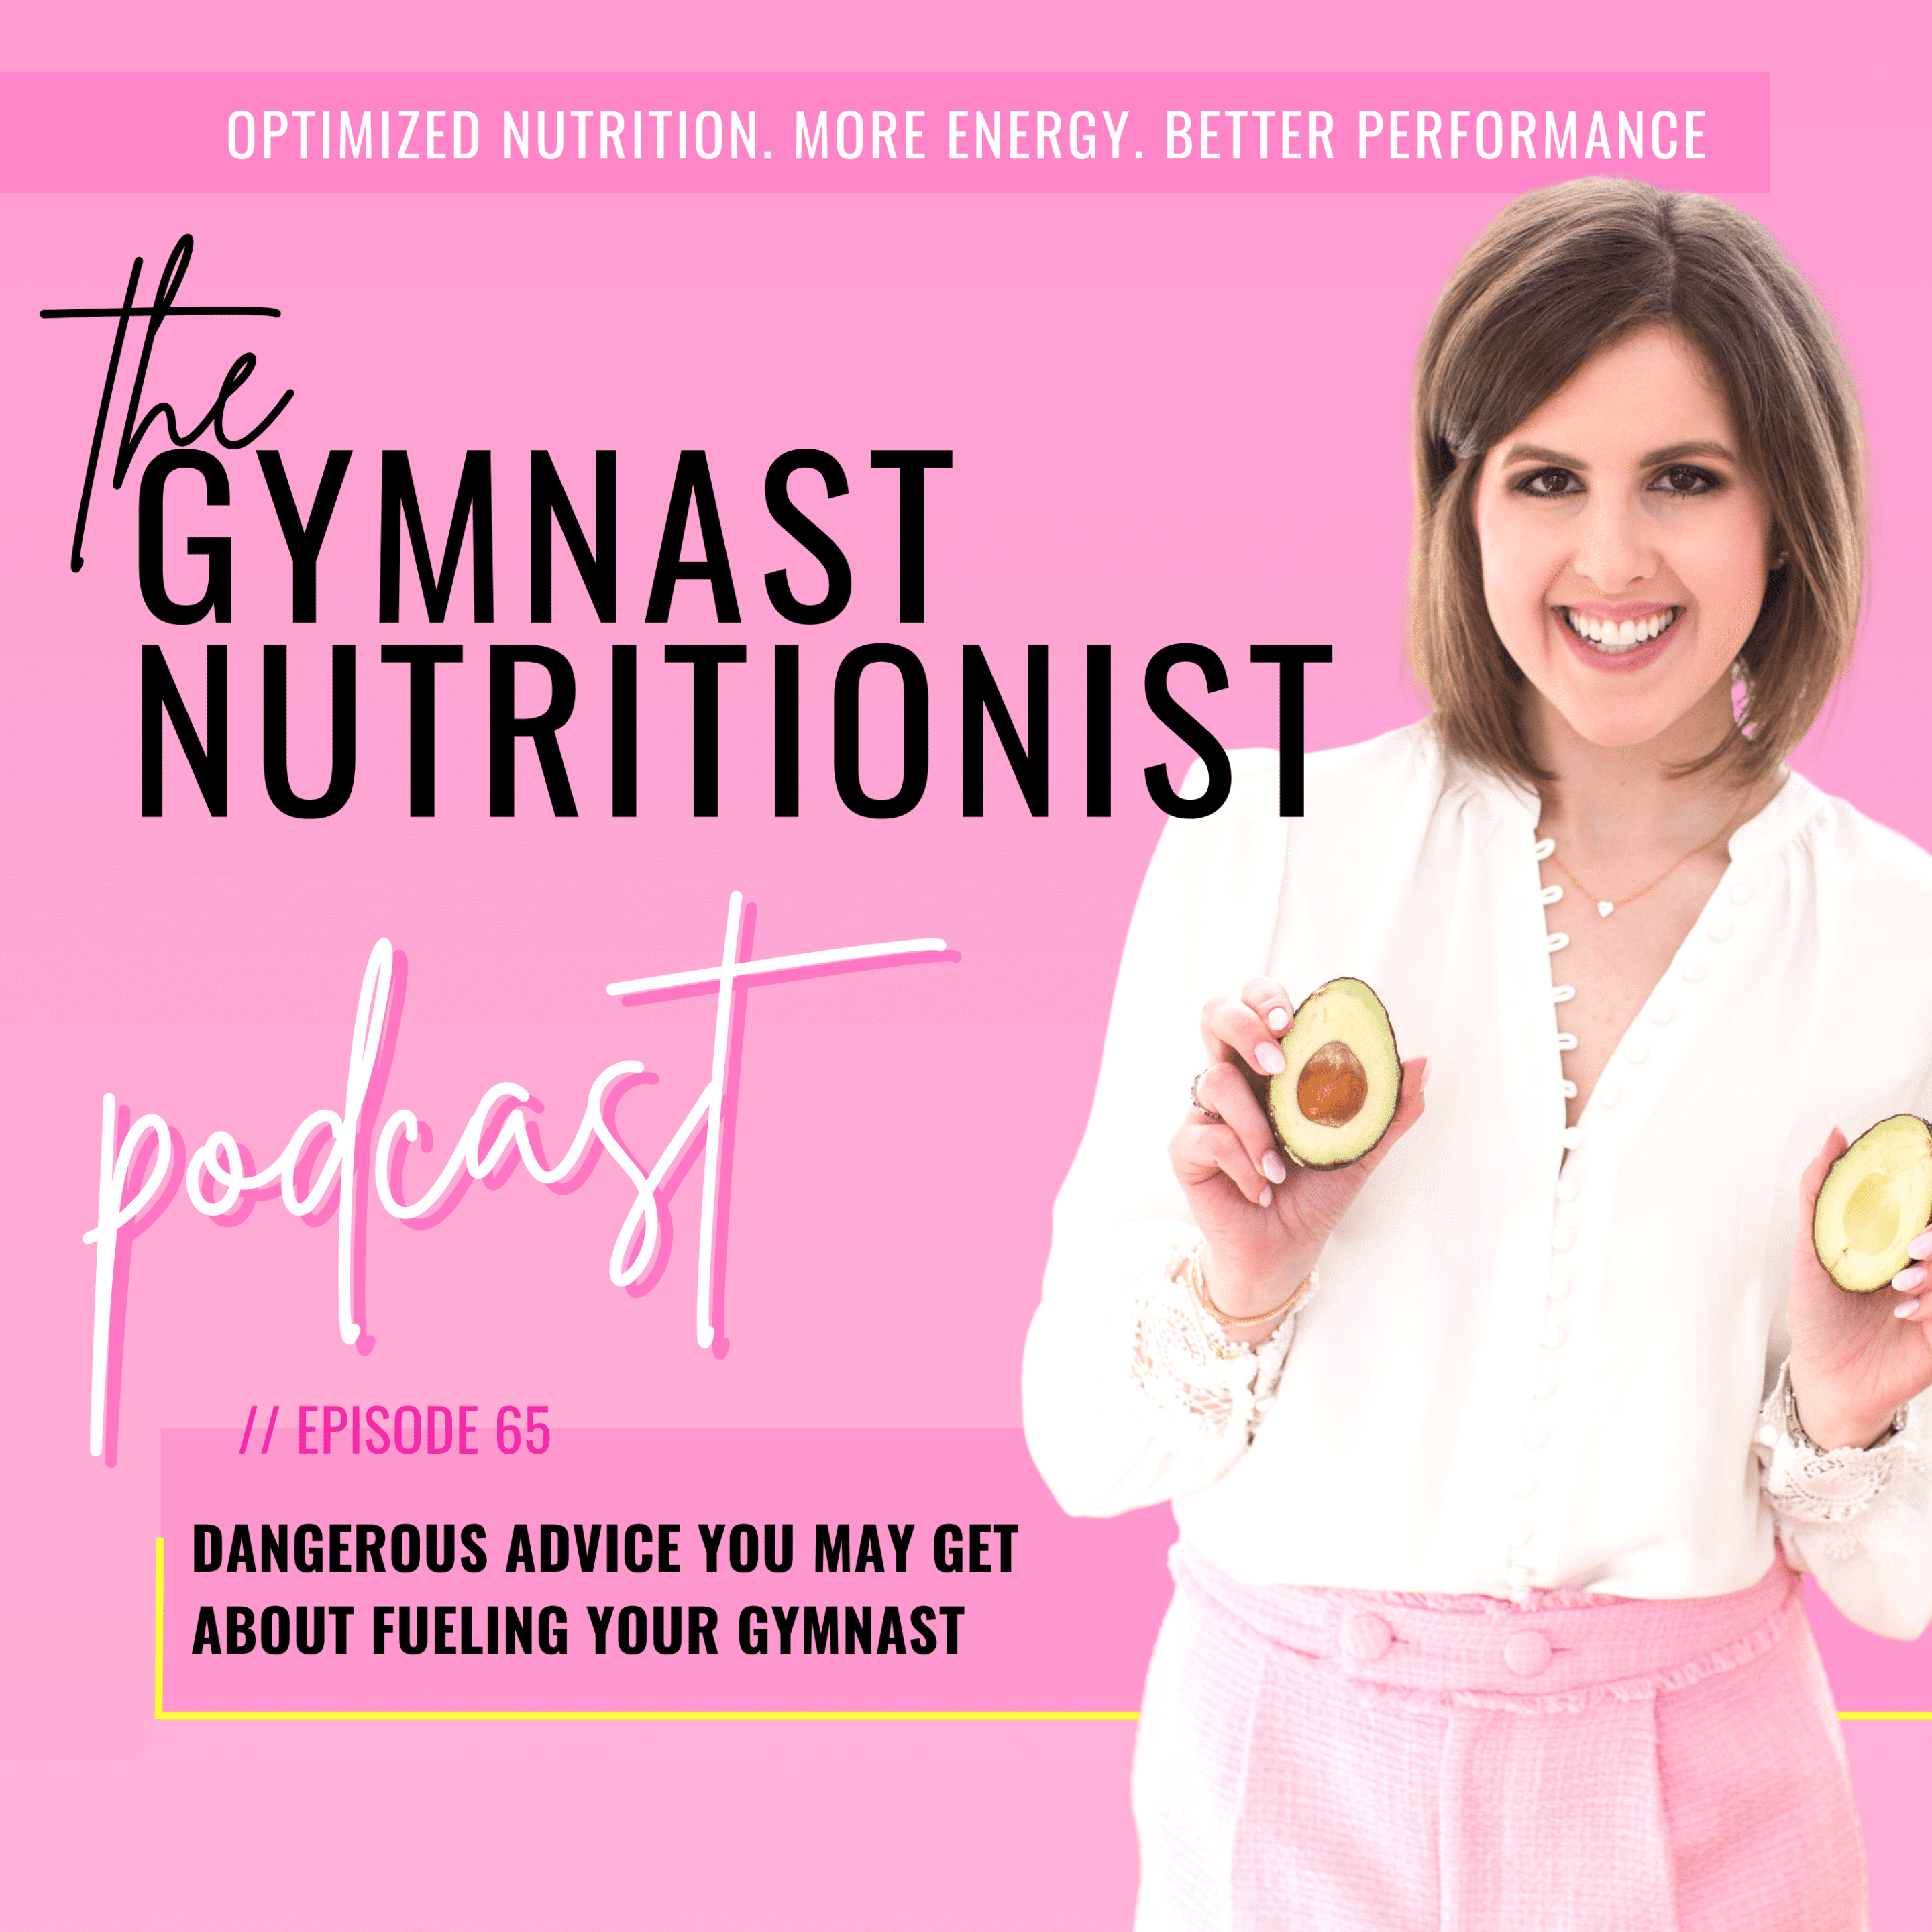 Episode 65: Dangerous advice you may get about fueling your gymnast